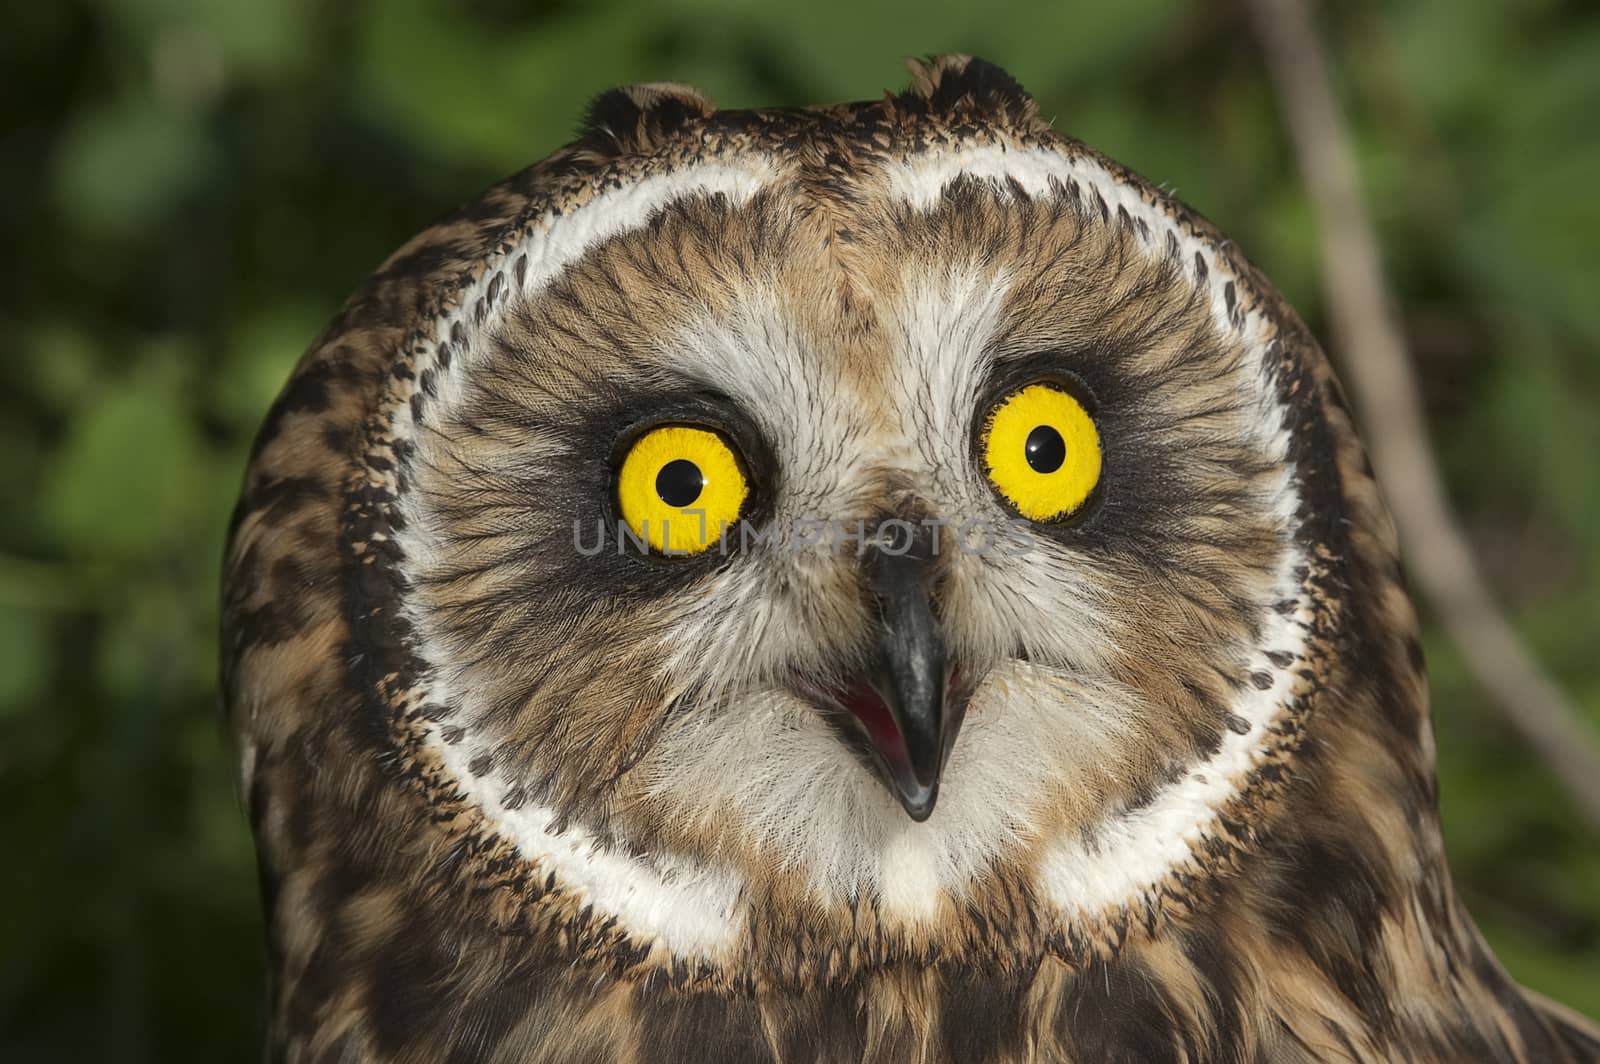 Short eared owl, Asio flammeus, country owl, portrait of eyes an by jalonsohu@gmail.com